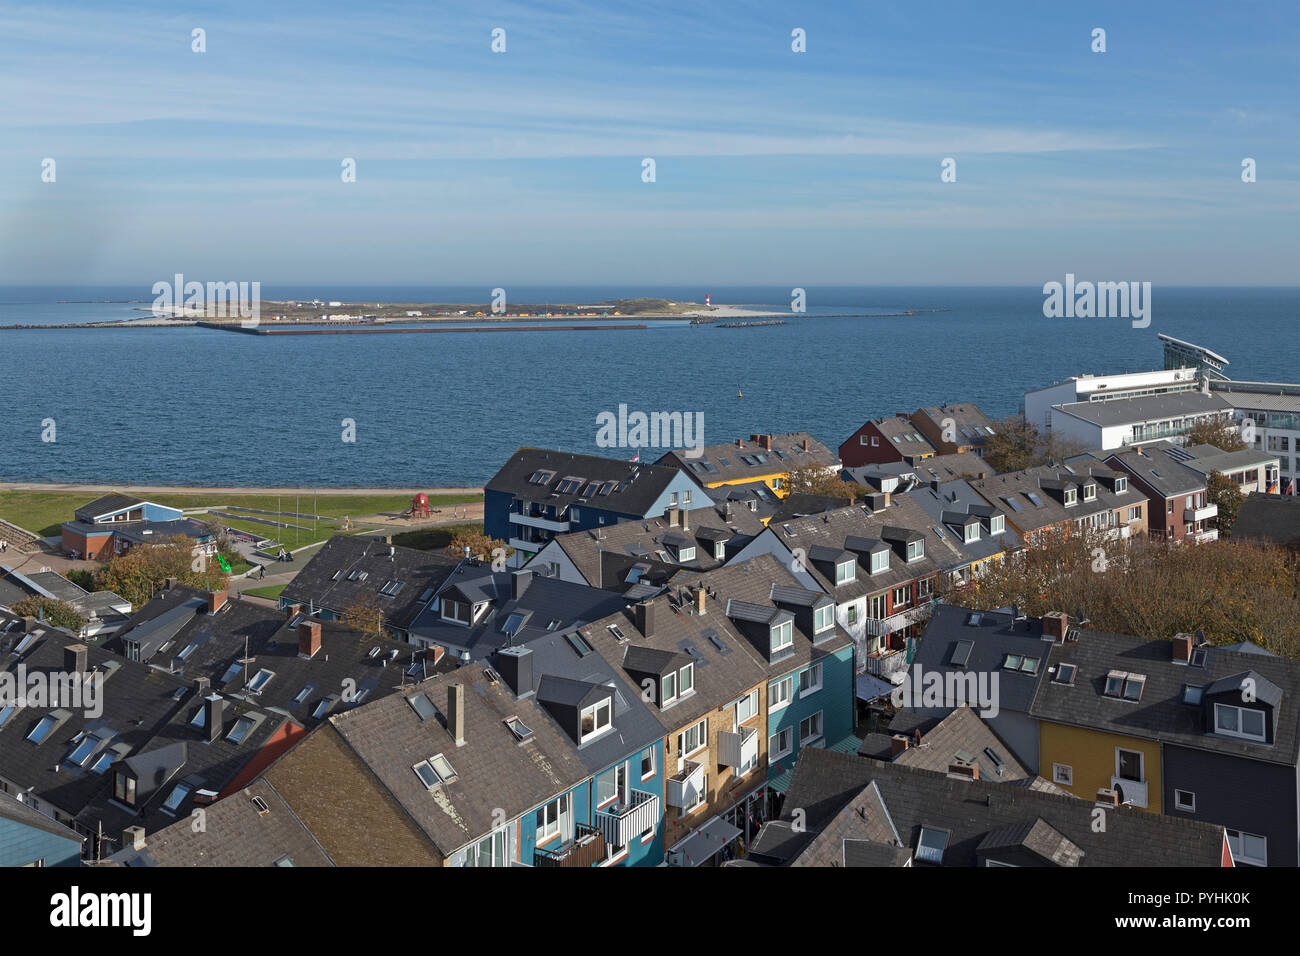 Unterland (lower country) with Hotel atoll helgoland, in the background the Duene, Heligoland, Schleswig-Holstein, Germany Stock Photo